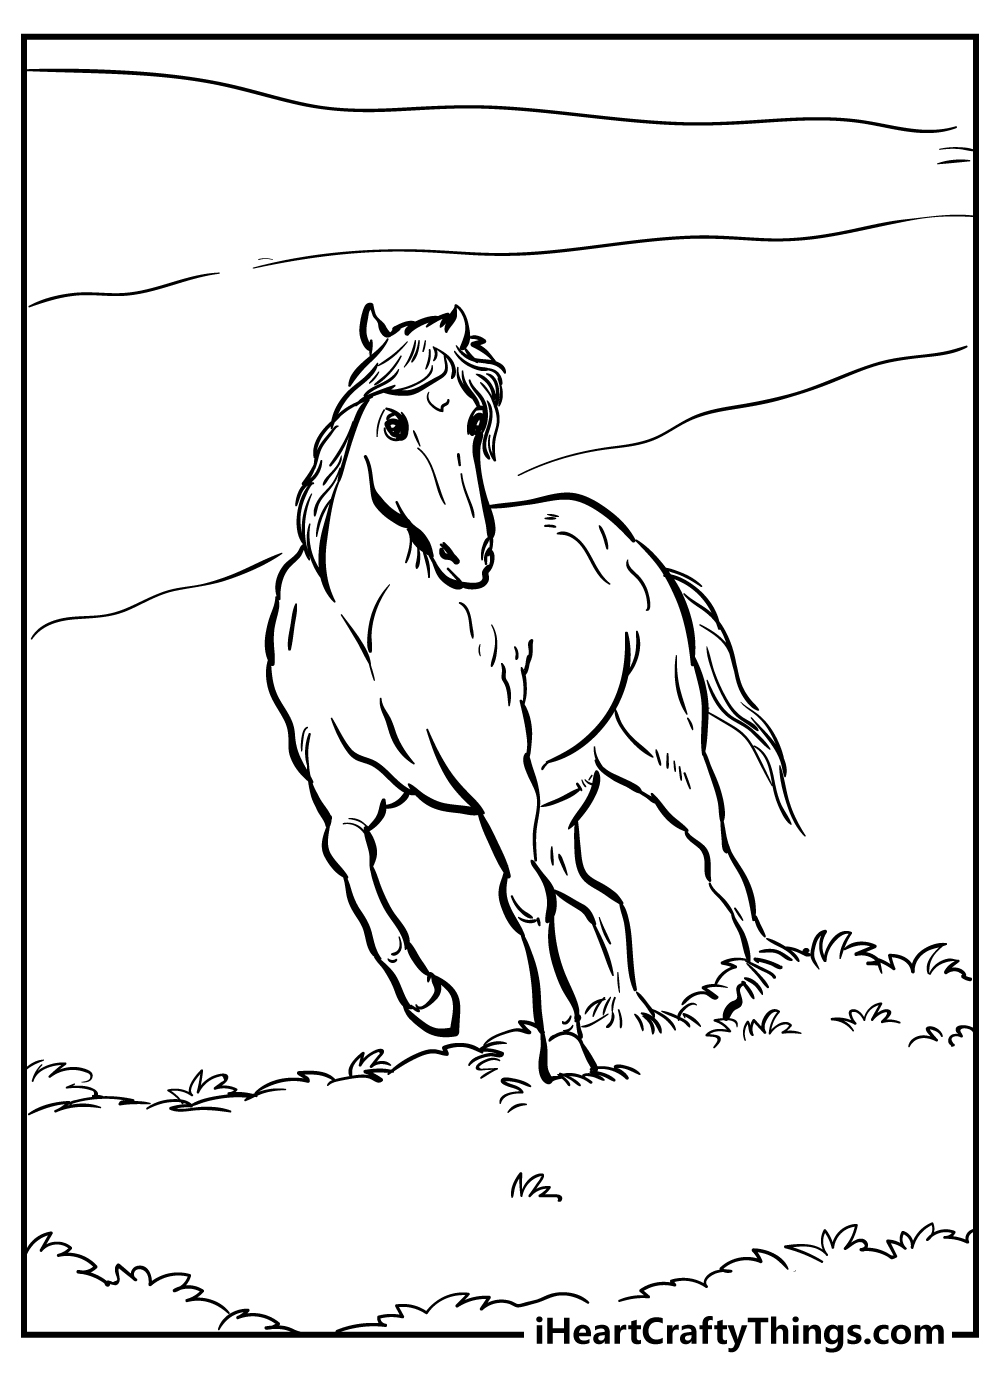 Unique Horse Easy Coloring Pages free printable